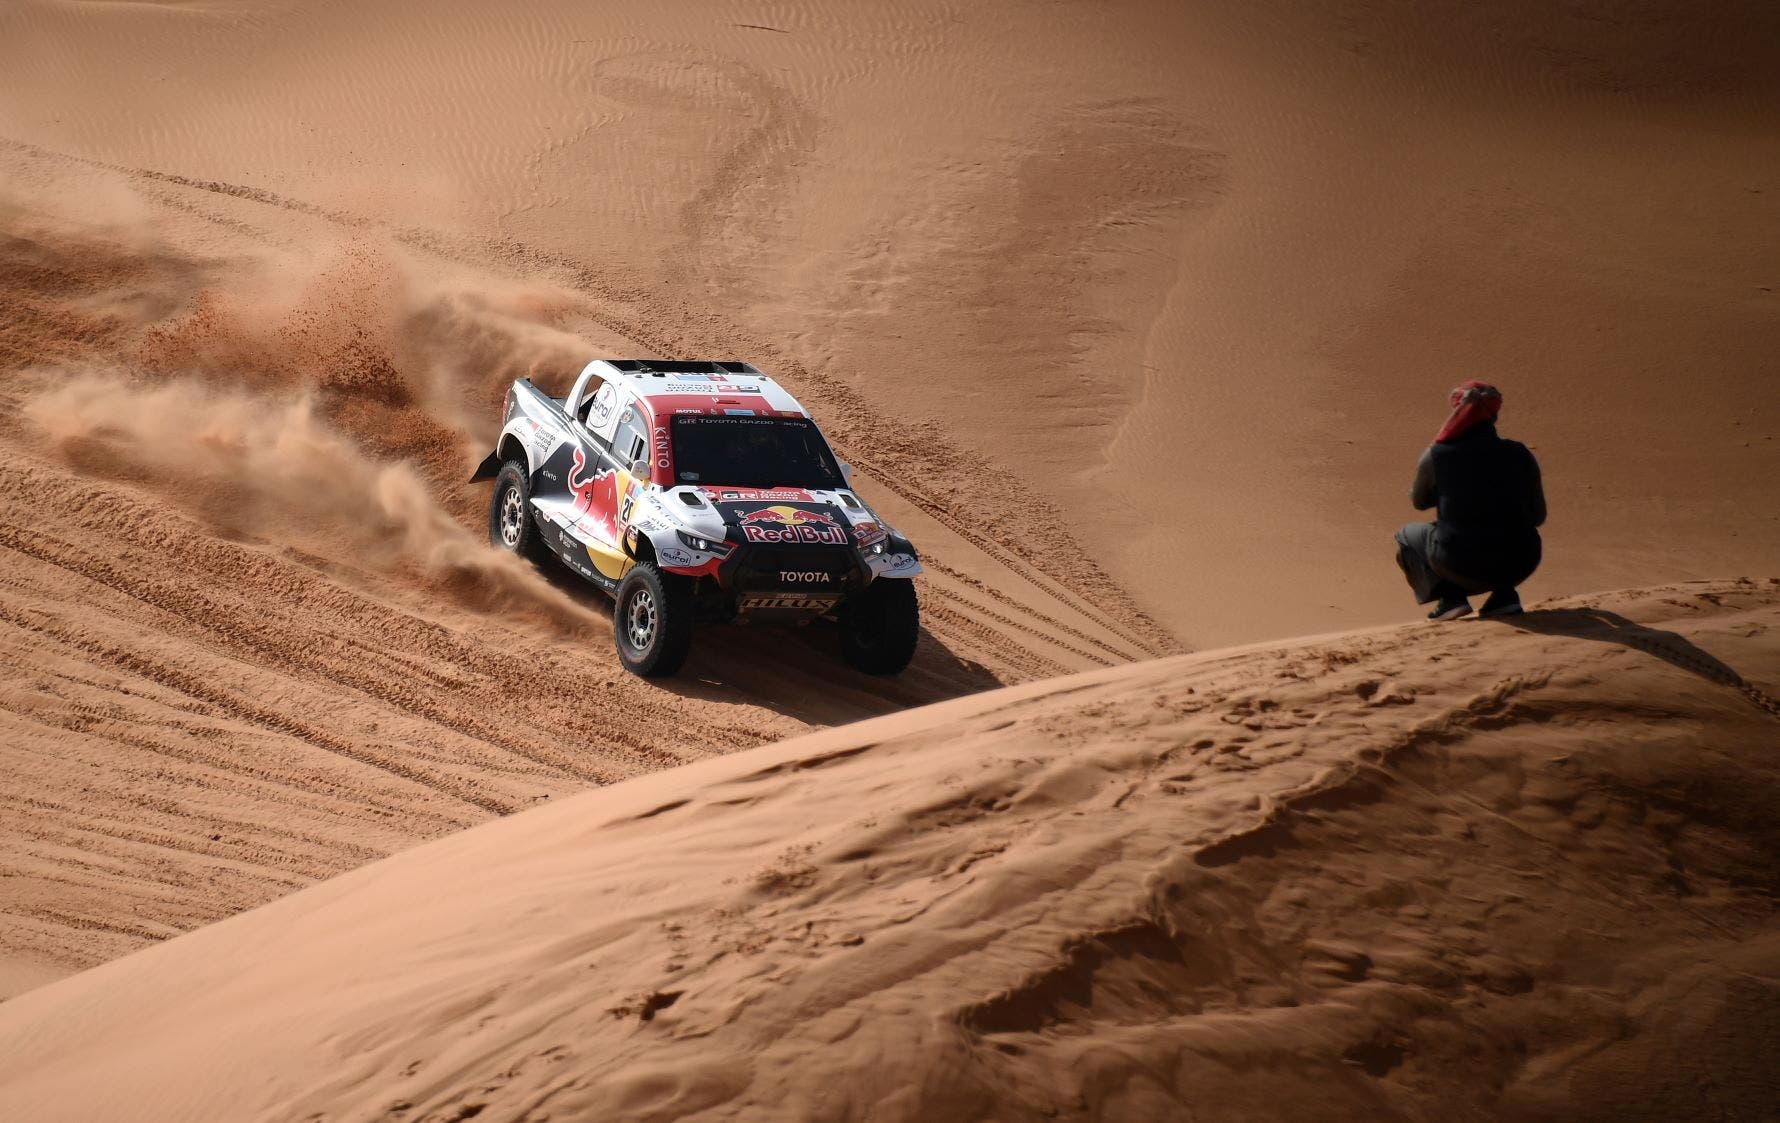 Toyota's driver Nasser Al-Attiyah of Qatar and his co-driver Mathieu Baumel of France compete during Stage 3 of the Dakar Rally 2022 between the Saudi areas of al-Artawiya and al-Qaysumah, on January 4, 2022. (AFP)